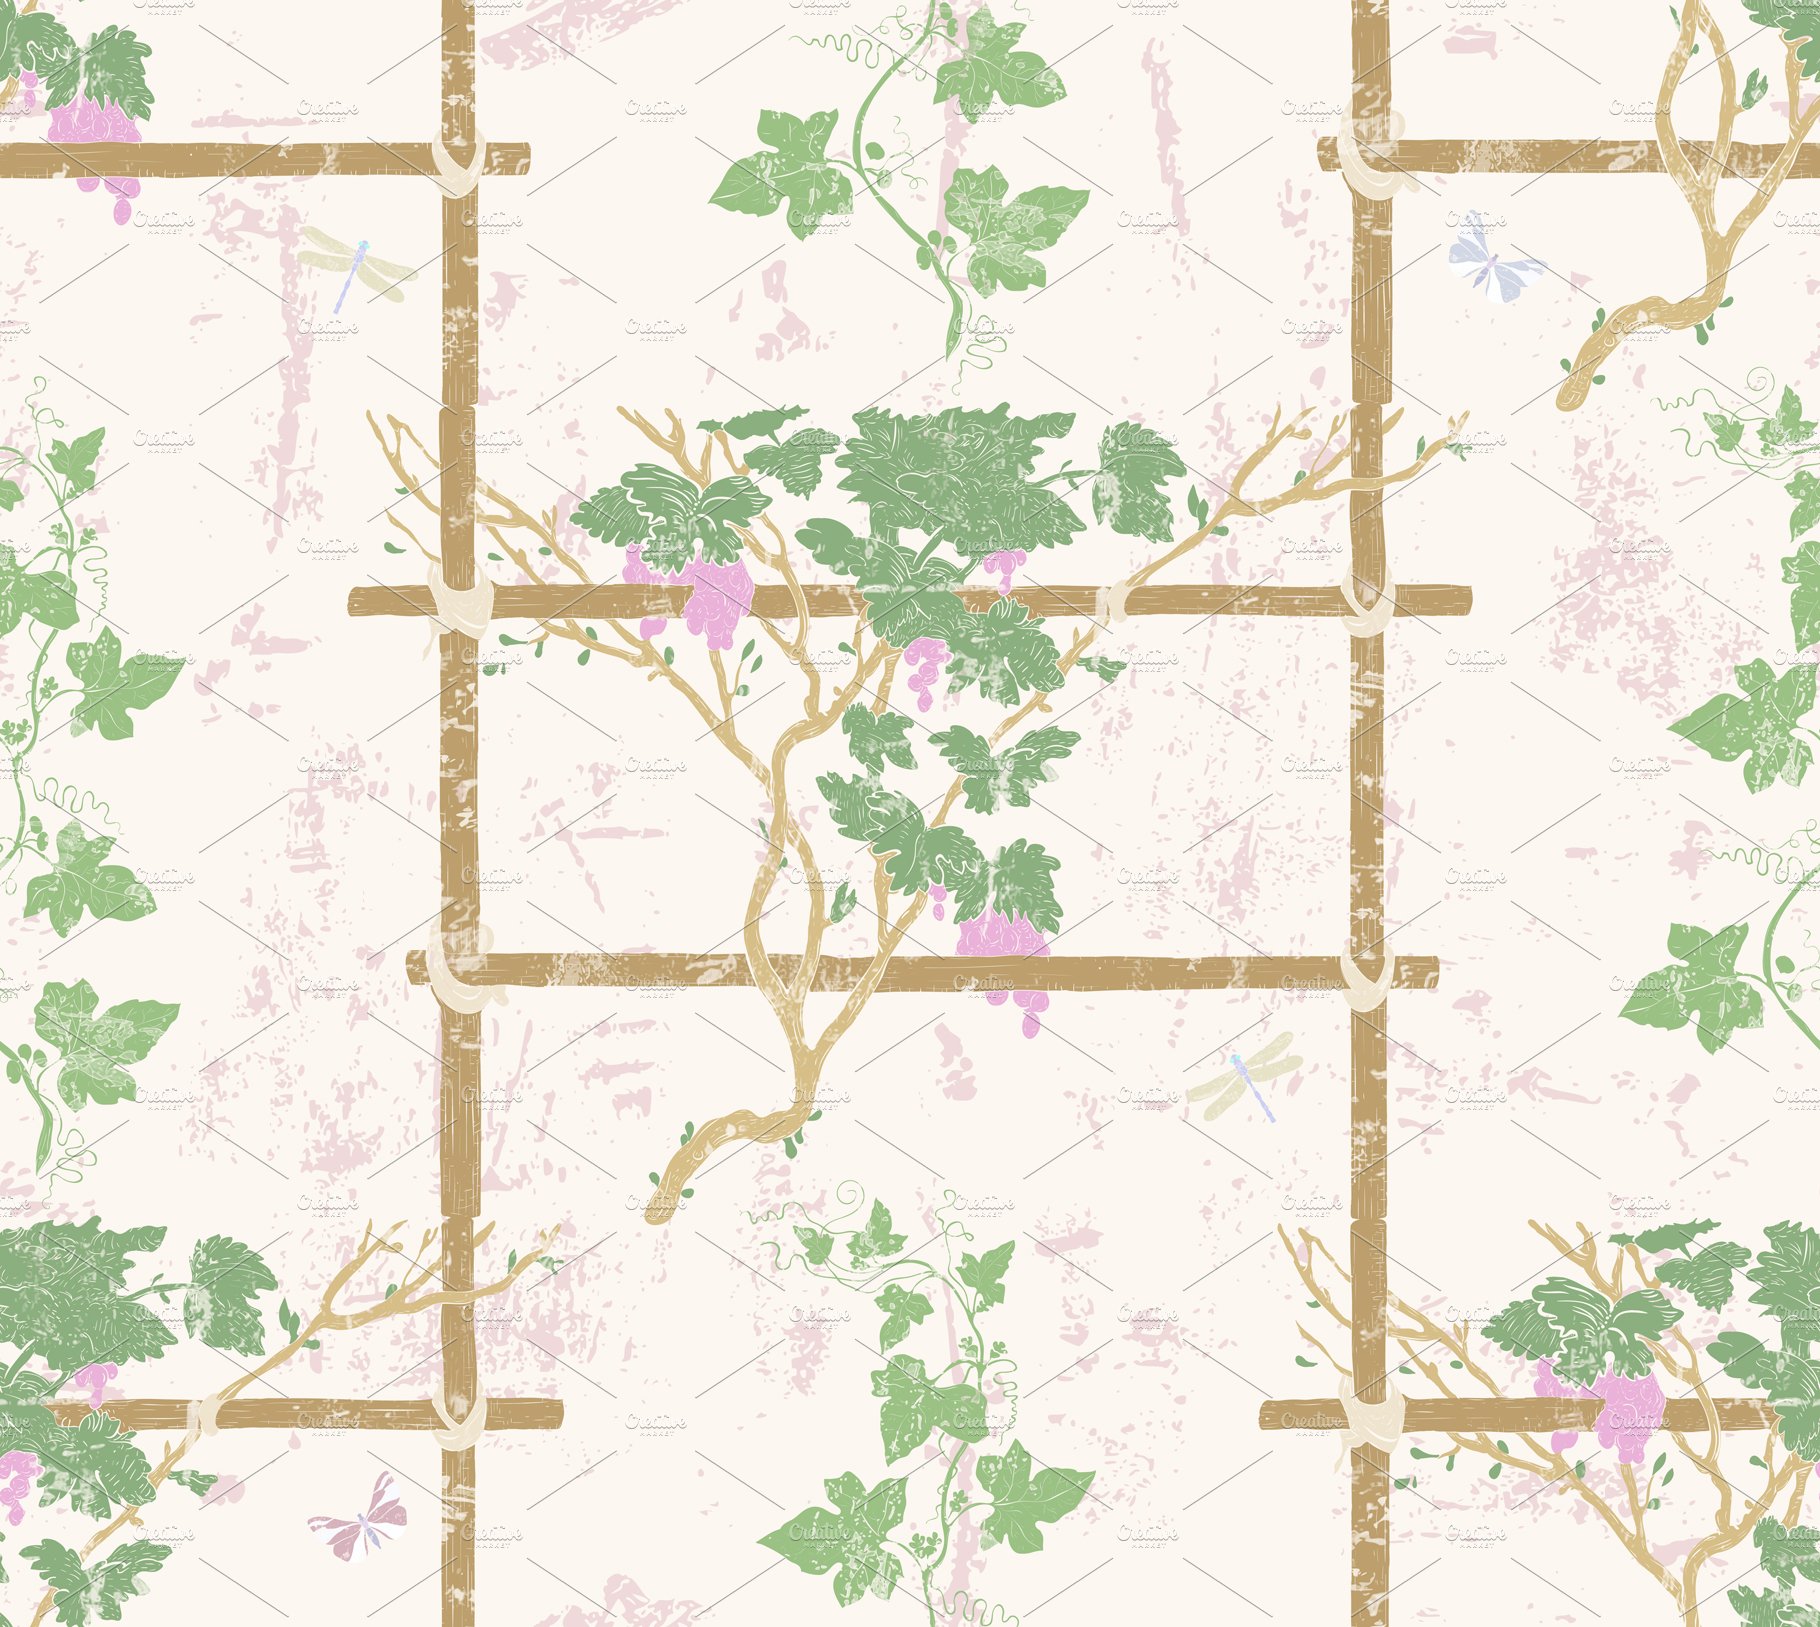 Grapevine & Insects seamless pattern preview image.